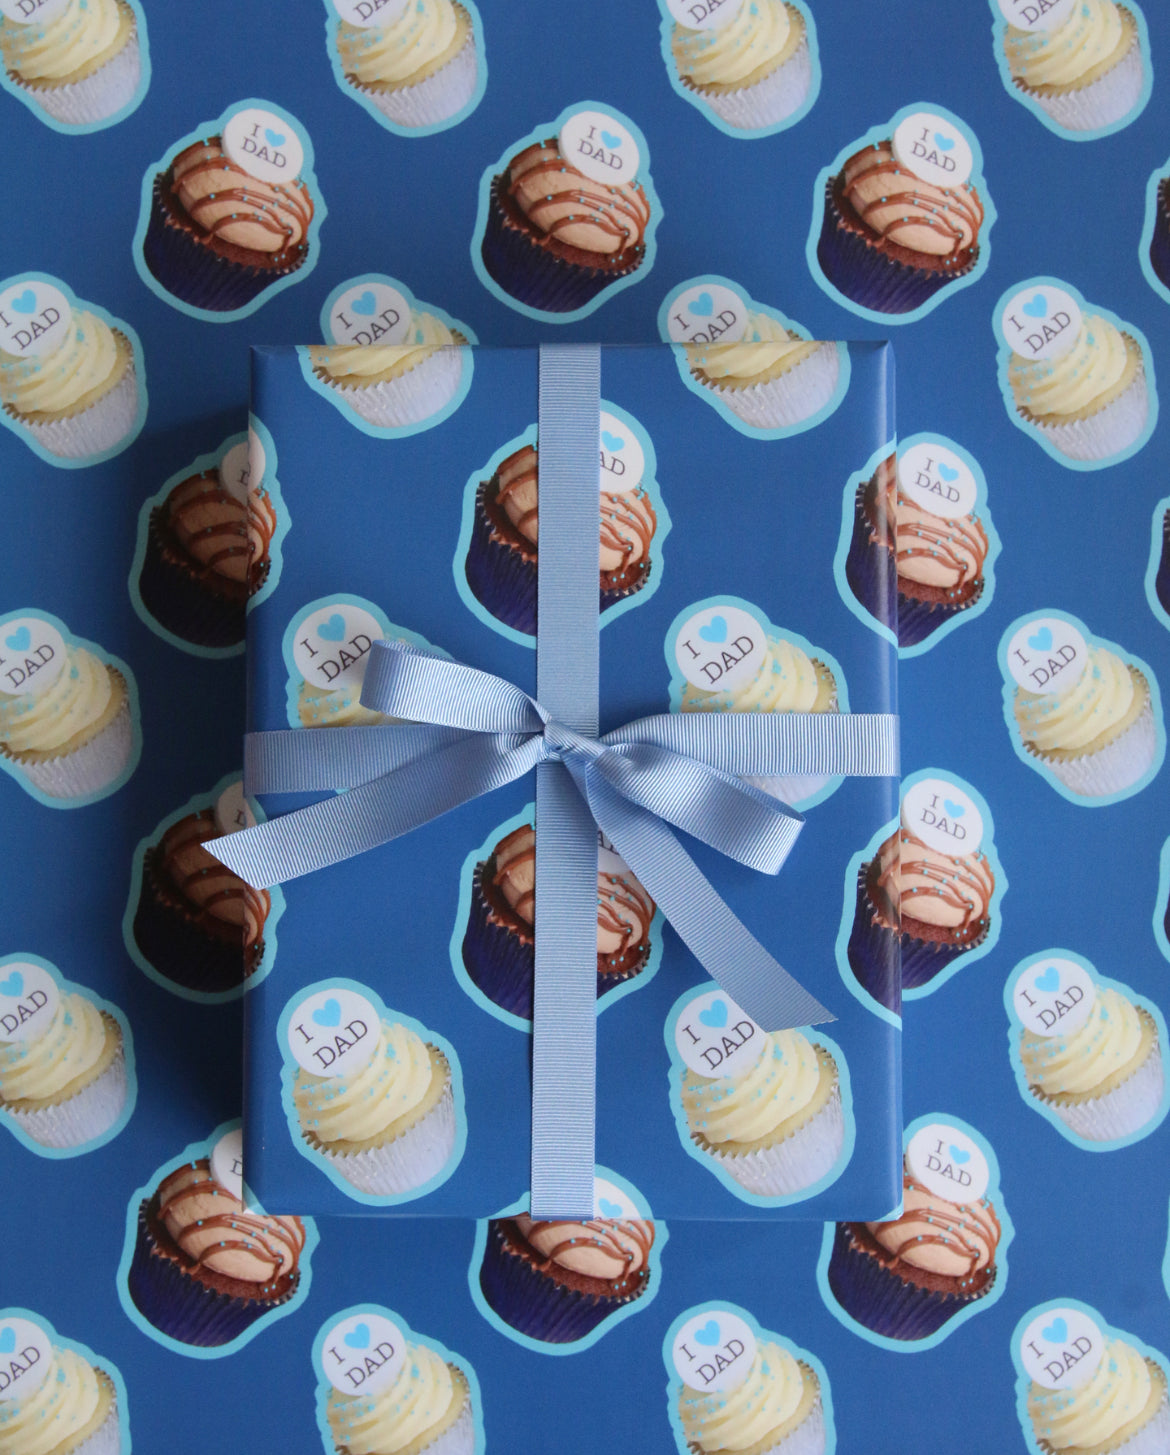 "I Heart Dad" Cupcake Wrapping Paper